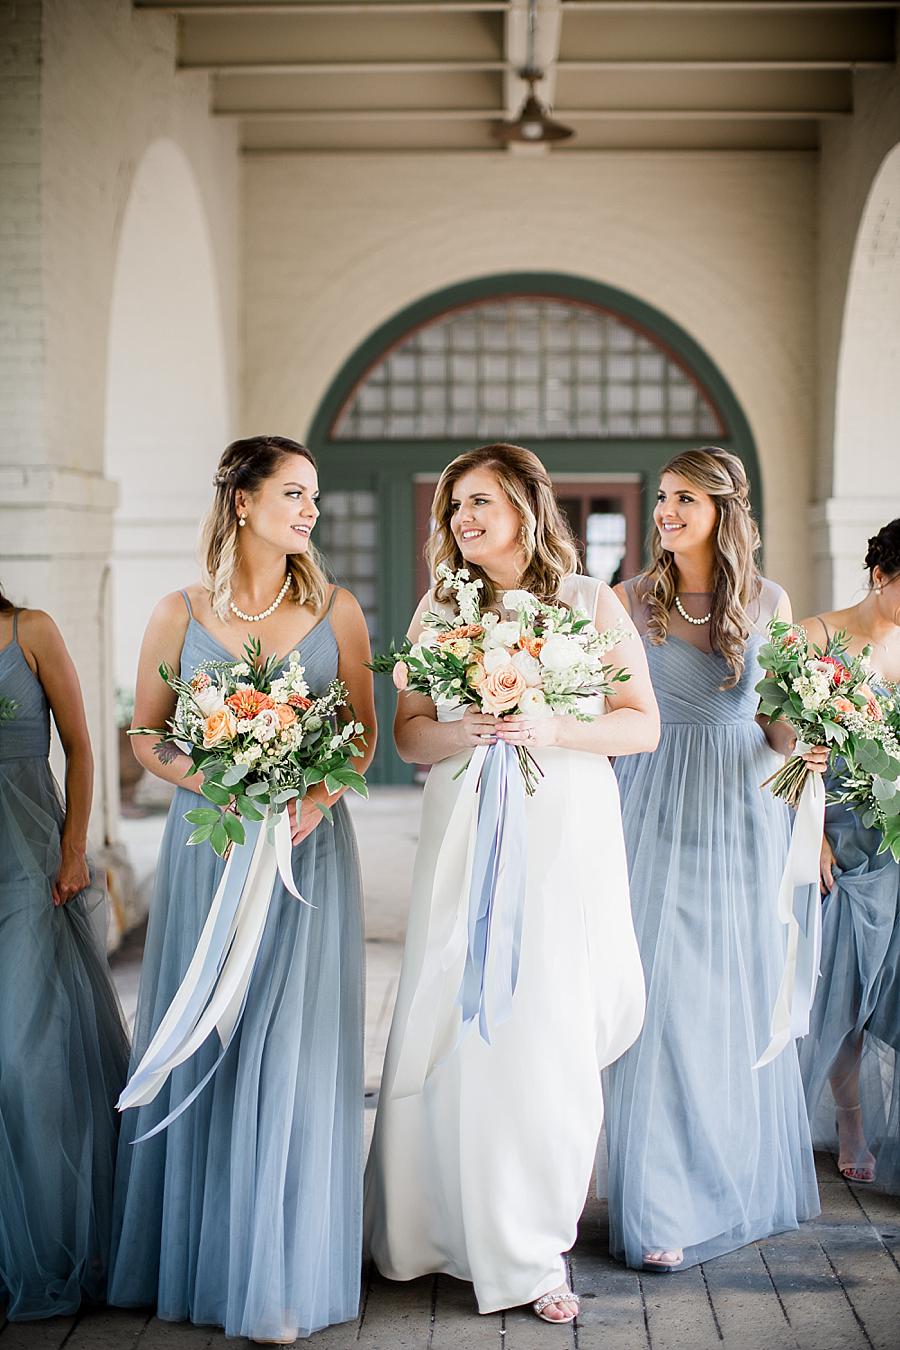 Light blue bridesmaid dresses at this Southern Railway Station Wedding by Knoxville Wedding Photographer, Amanda May Photos.